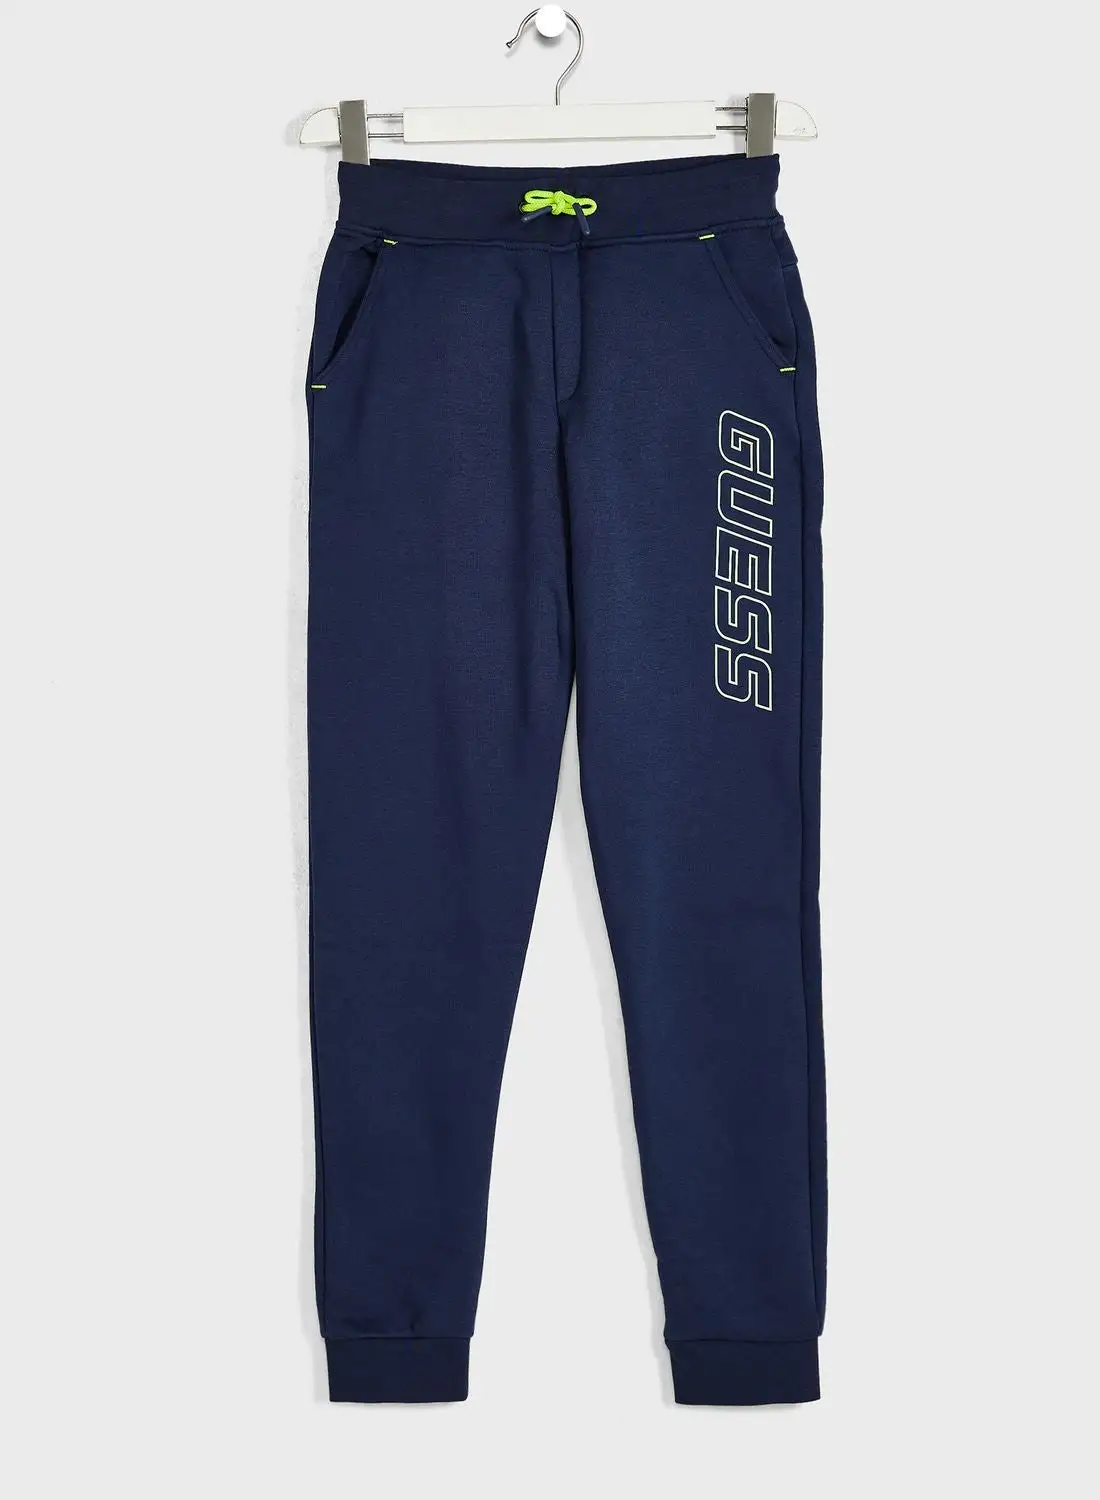 GUESS Youth Essential Sweatpants